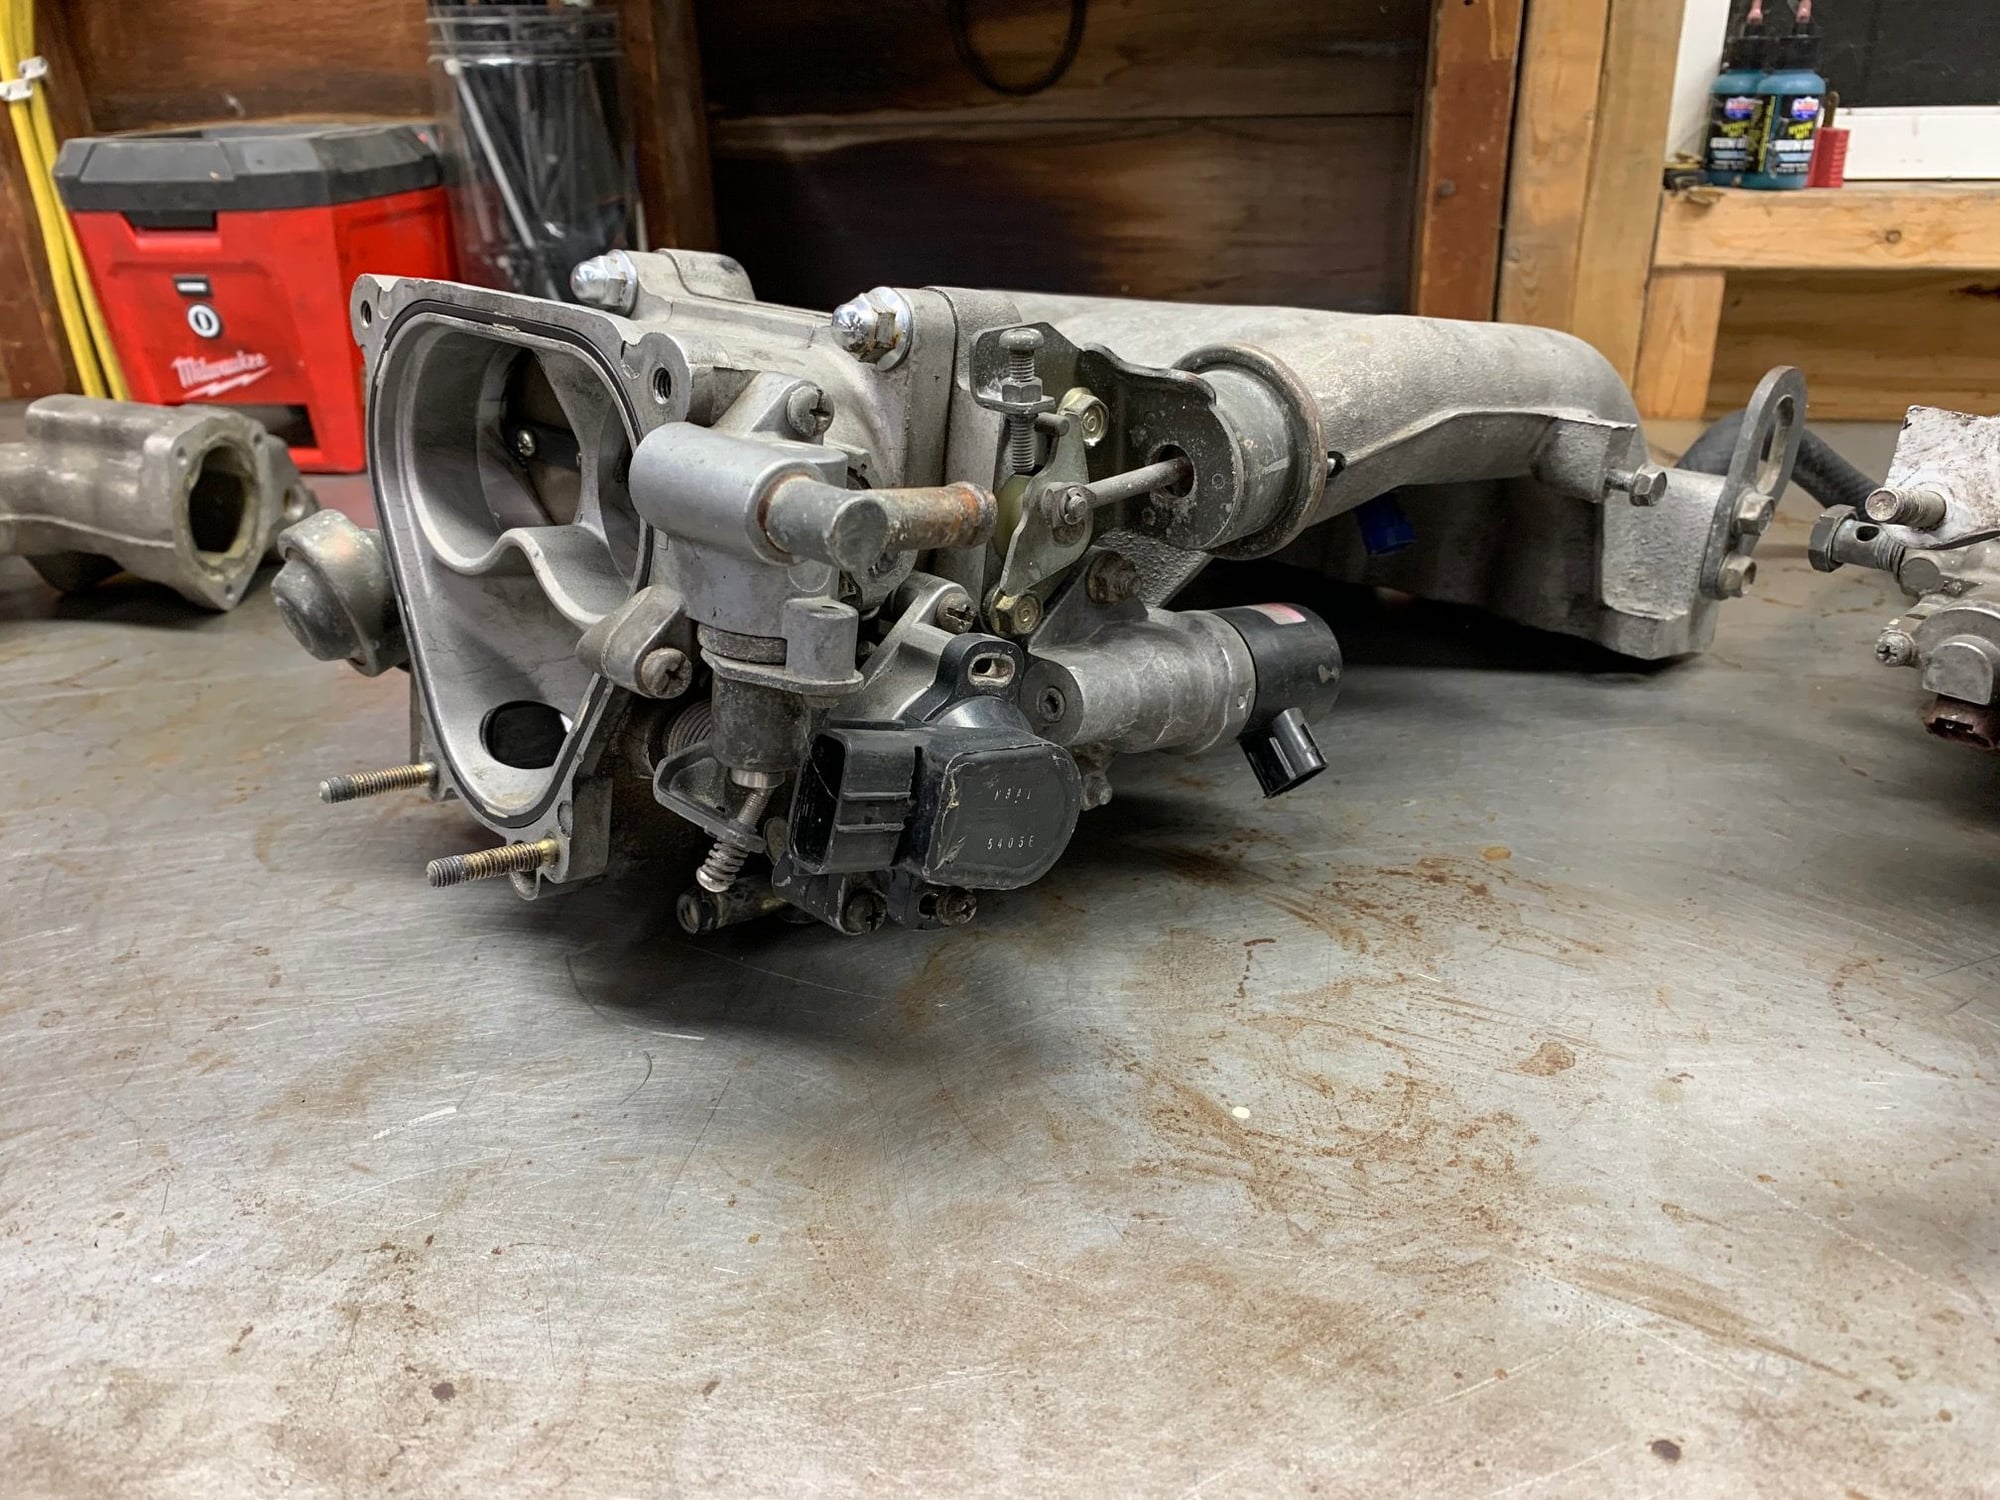 Engine - Intake/Fuel - Complete Intake Manifold, Throttle Body, Injectors, Fuel Rail - Used - 1986 to 2001 Mazda RX-7 - Fort Wayne, IN 46804, United States